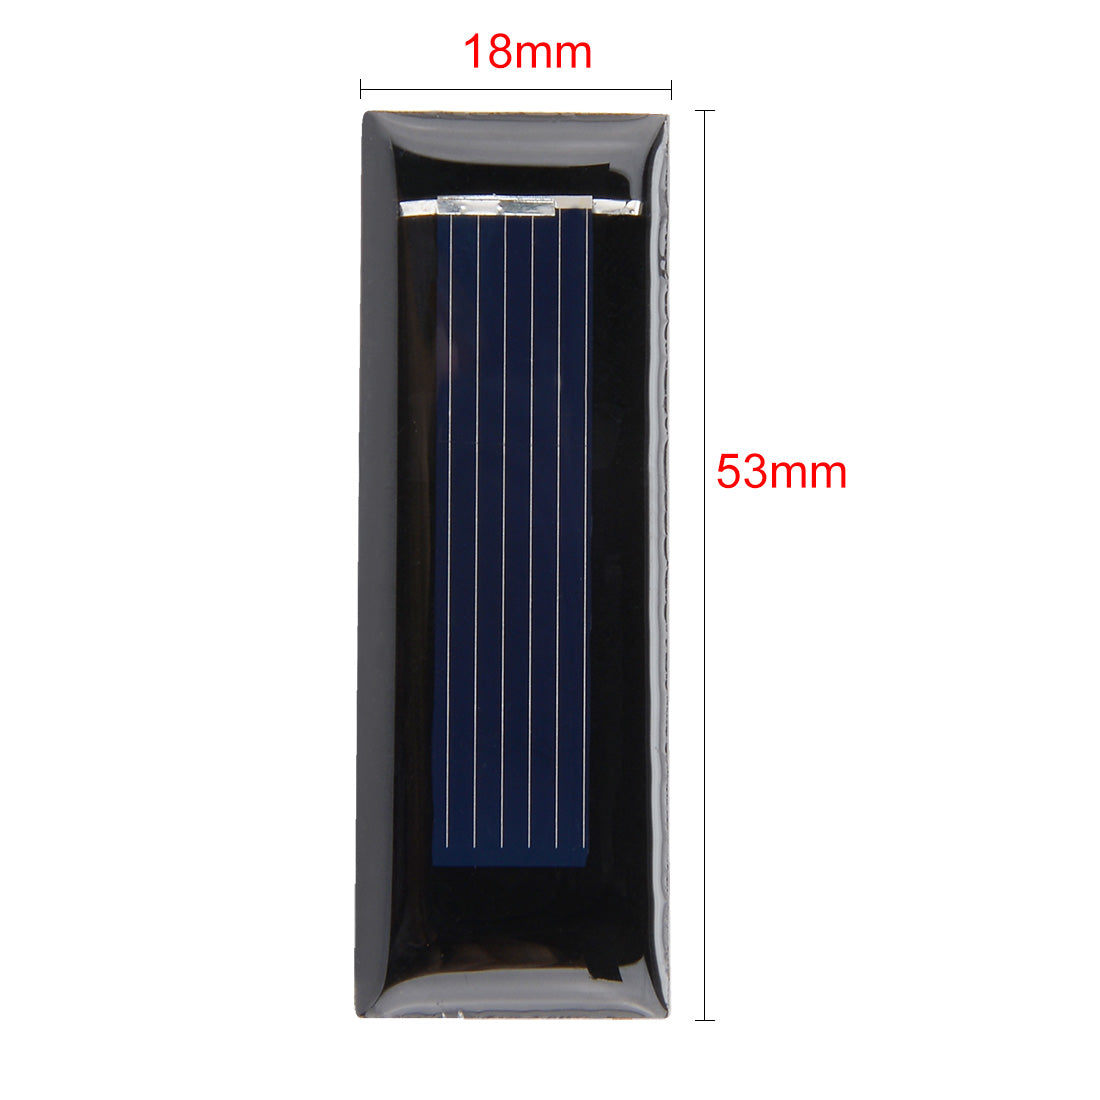 uxcell Uxcell 5Pcs 0.5V 100mA Poly Mini Solar Cell Panel Module DIY for Phone Light Toys Charger 53mm x 18mm